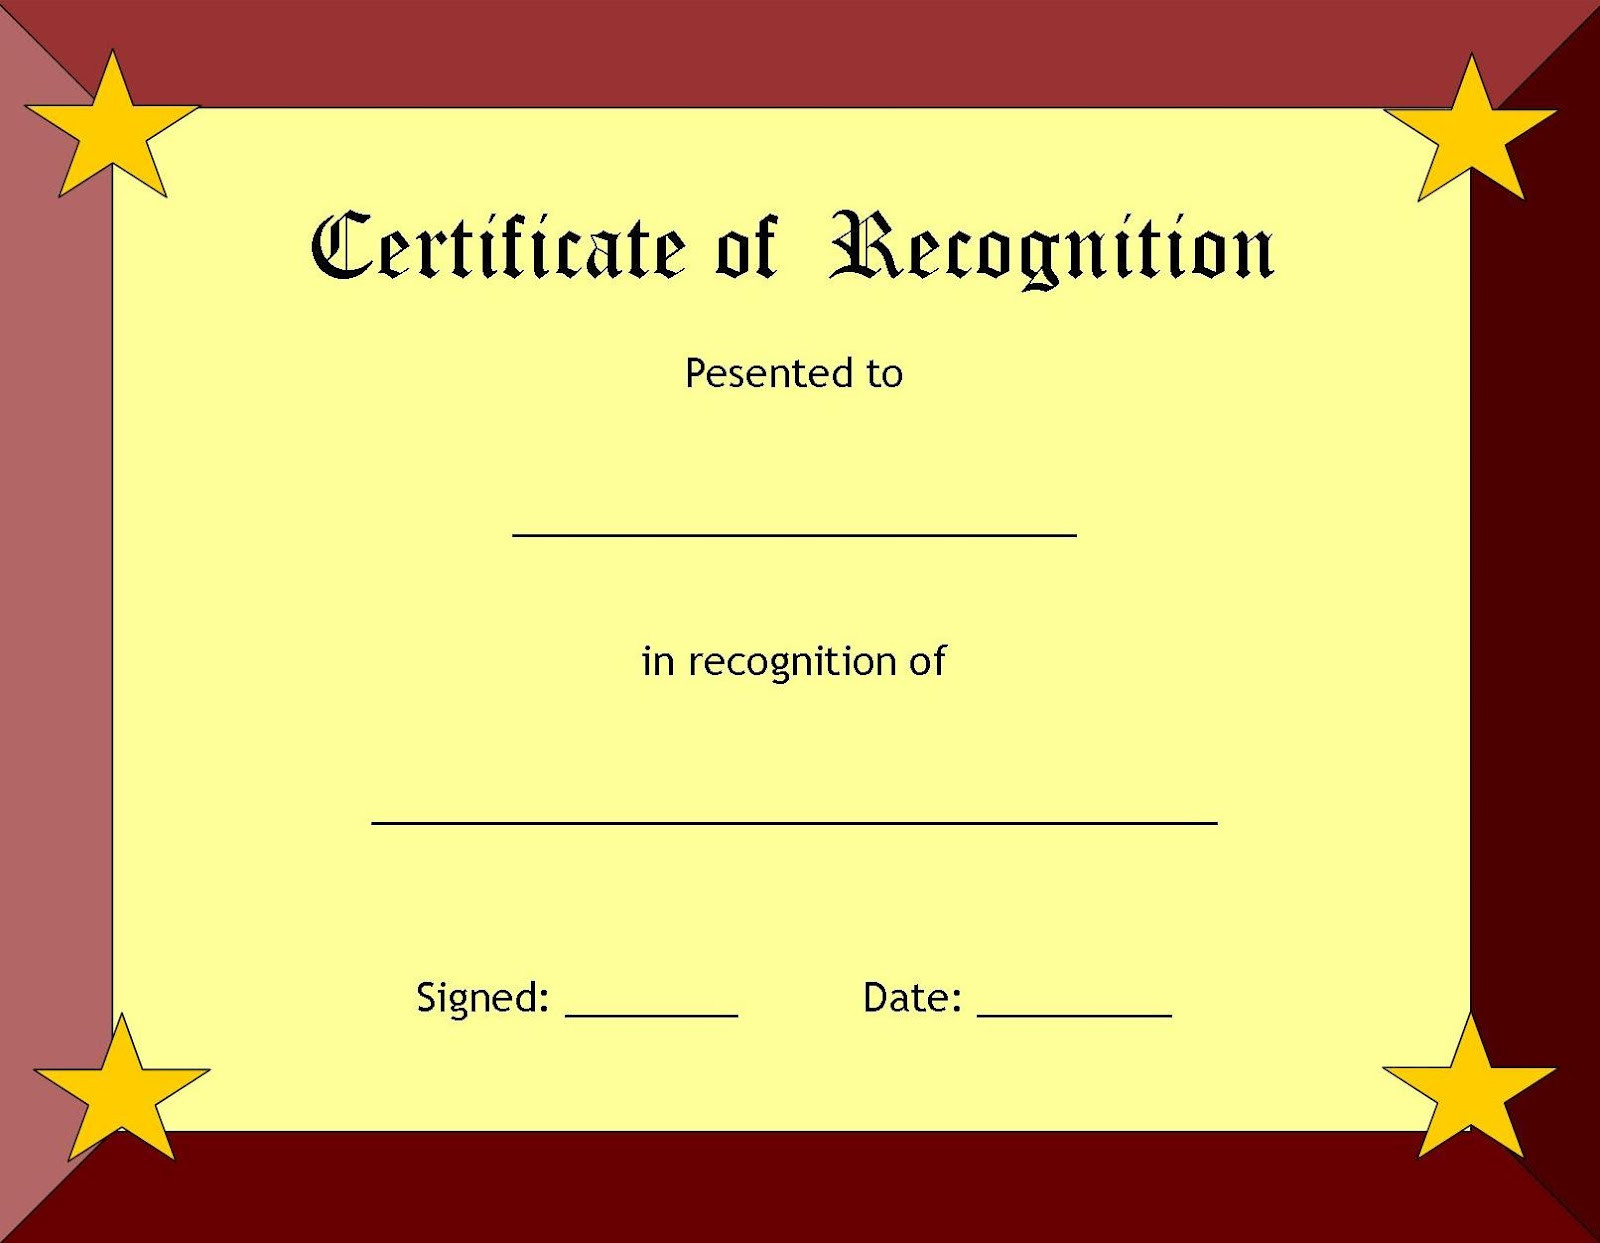 Award Certificate Template Free A Collection Of Free Certificate Borders and Templates